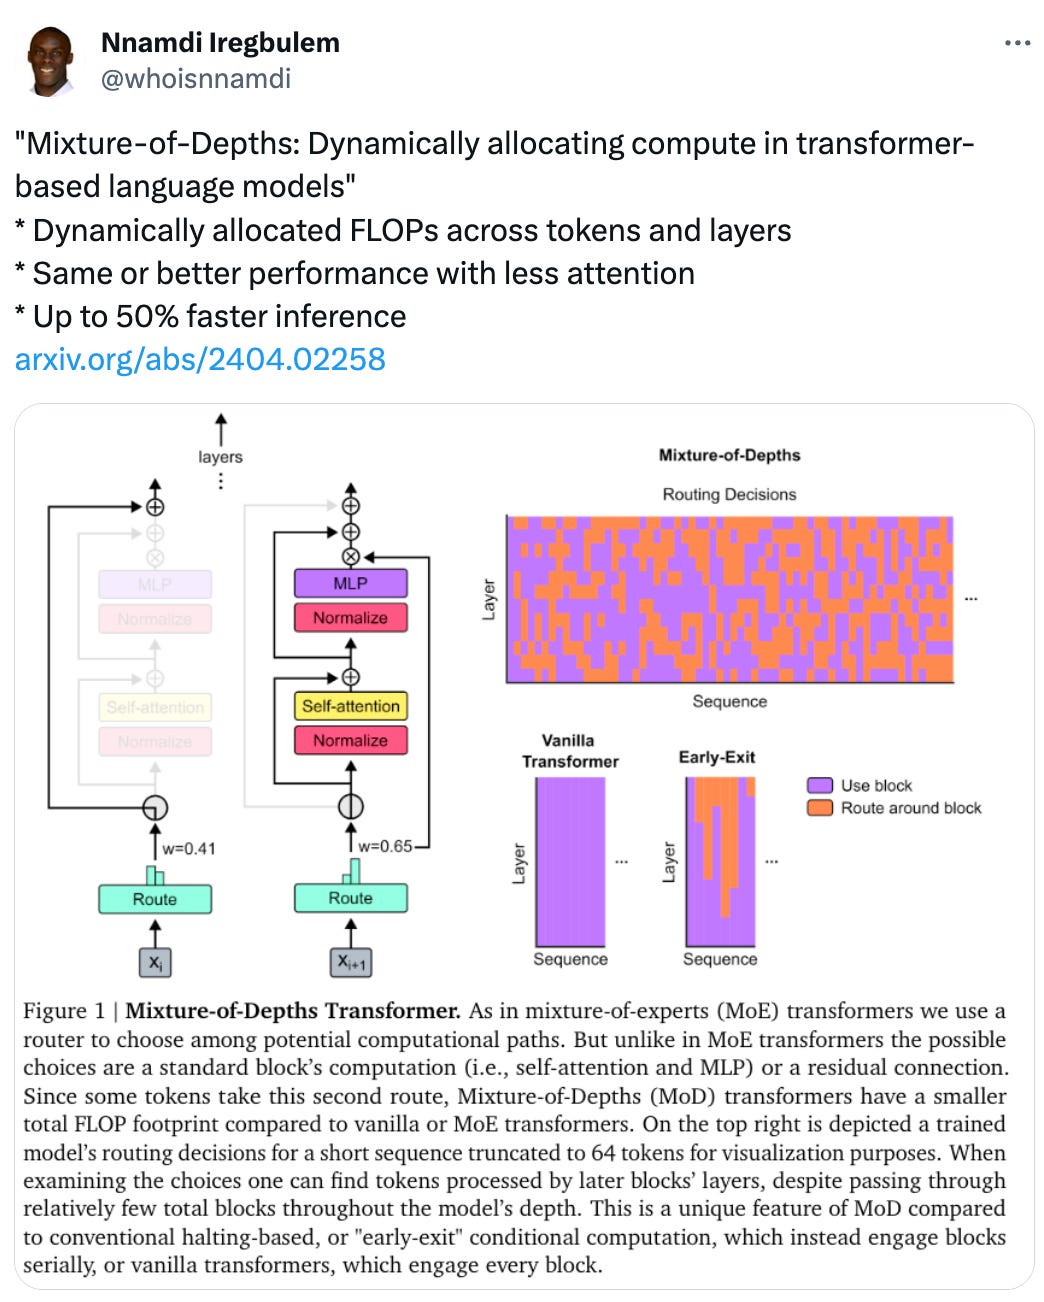  See new posts Conversation Nnamdi Iregbulem @whoisnnamdi "Mixture-of-Depths: Dynamically allocating compute in transformer-based language models" * Dynamically allocated FLOPs across tokens and layers * Same or better performance with less attention * Up to 50% faster inference https://arxiv.org/abs/2404.02258